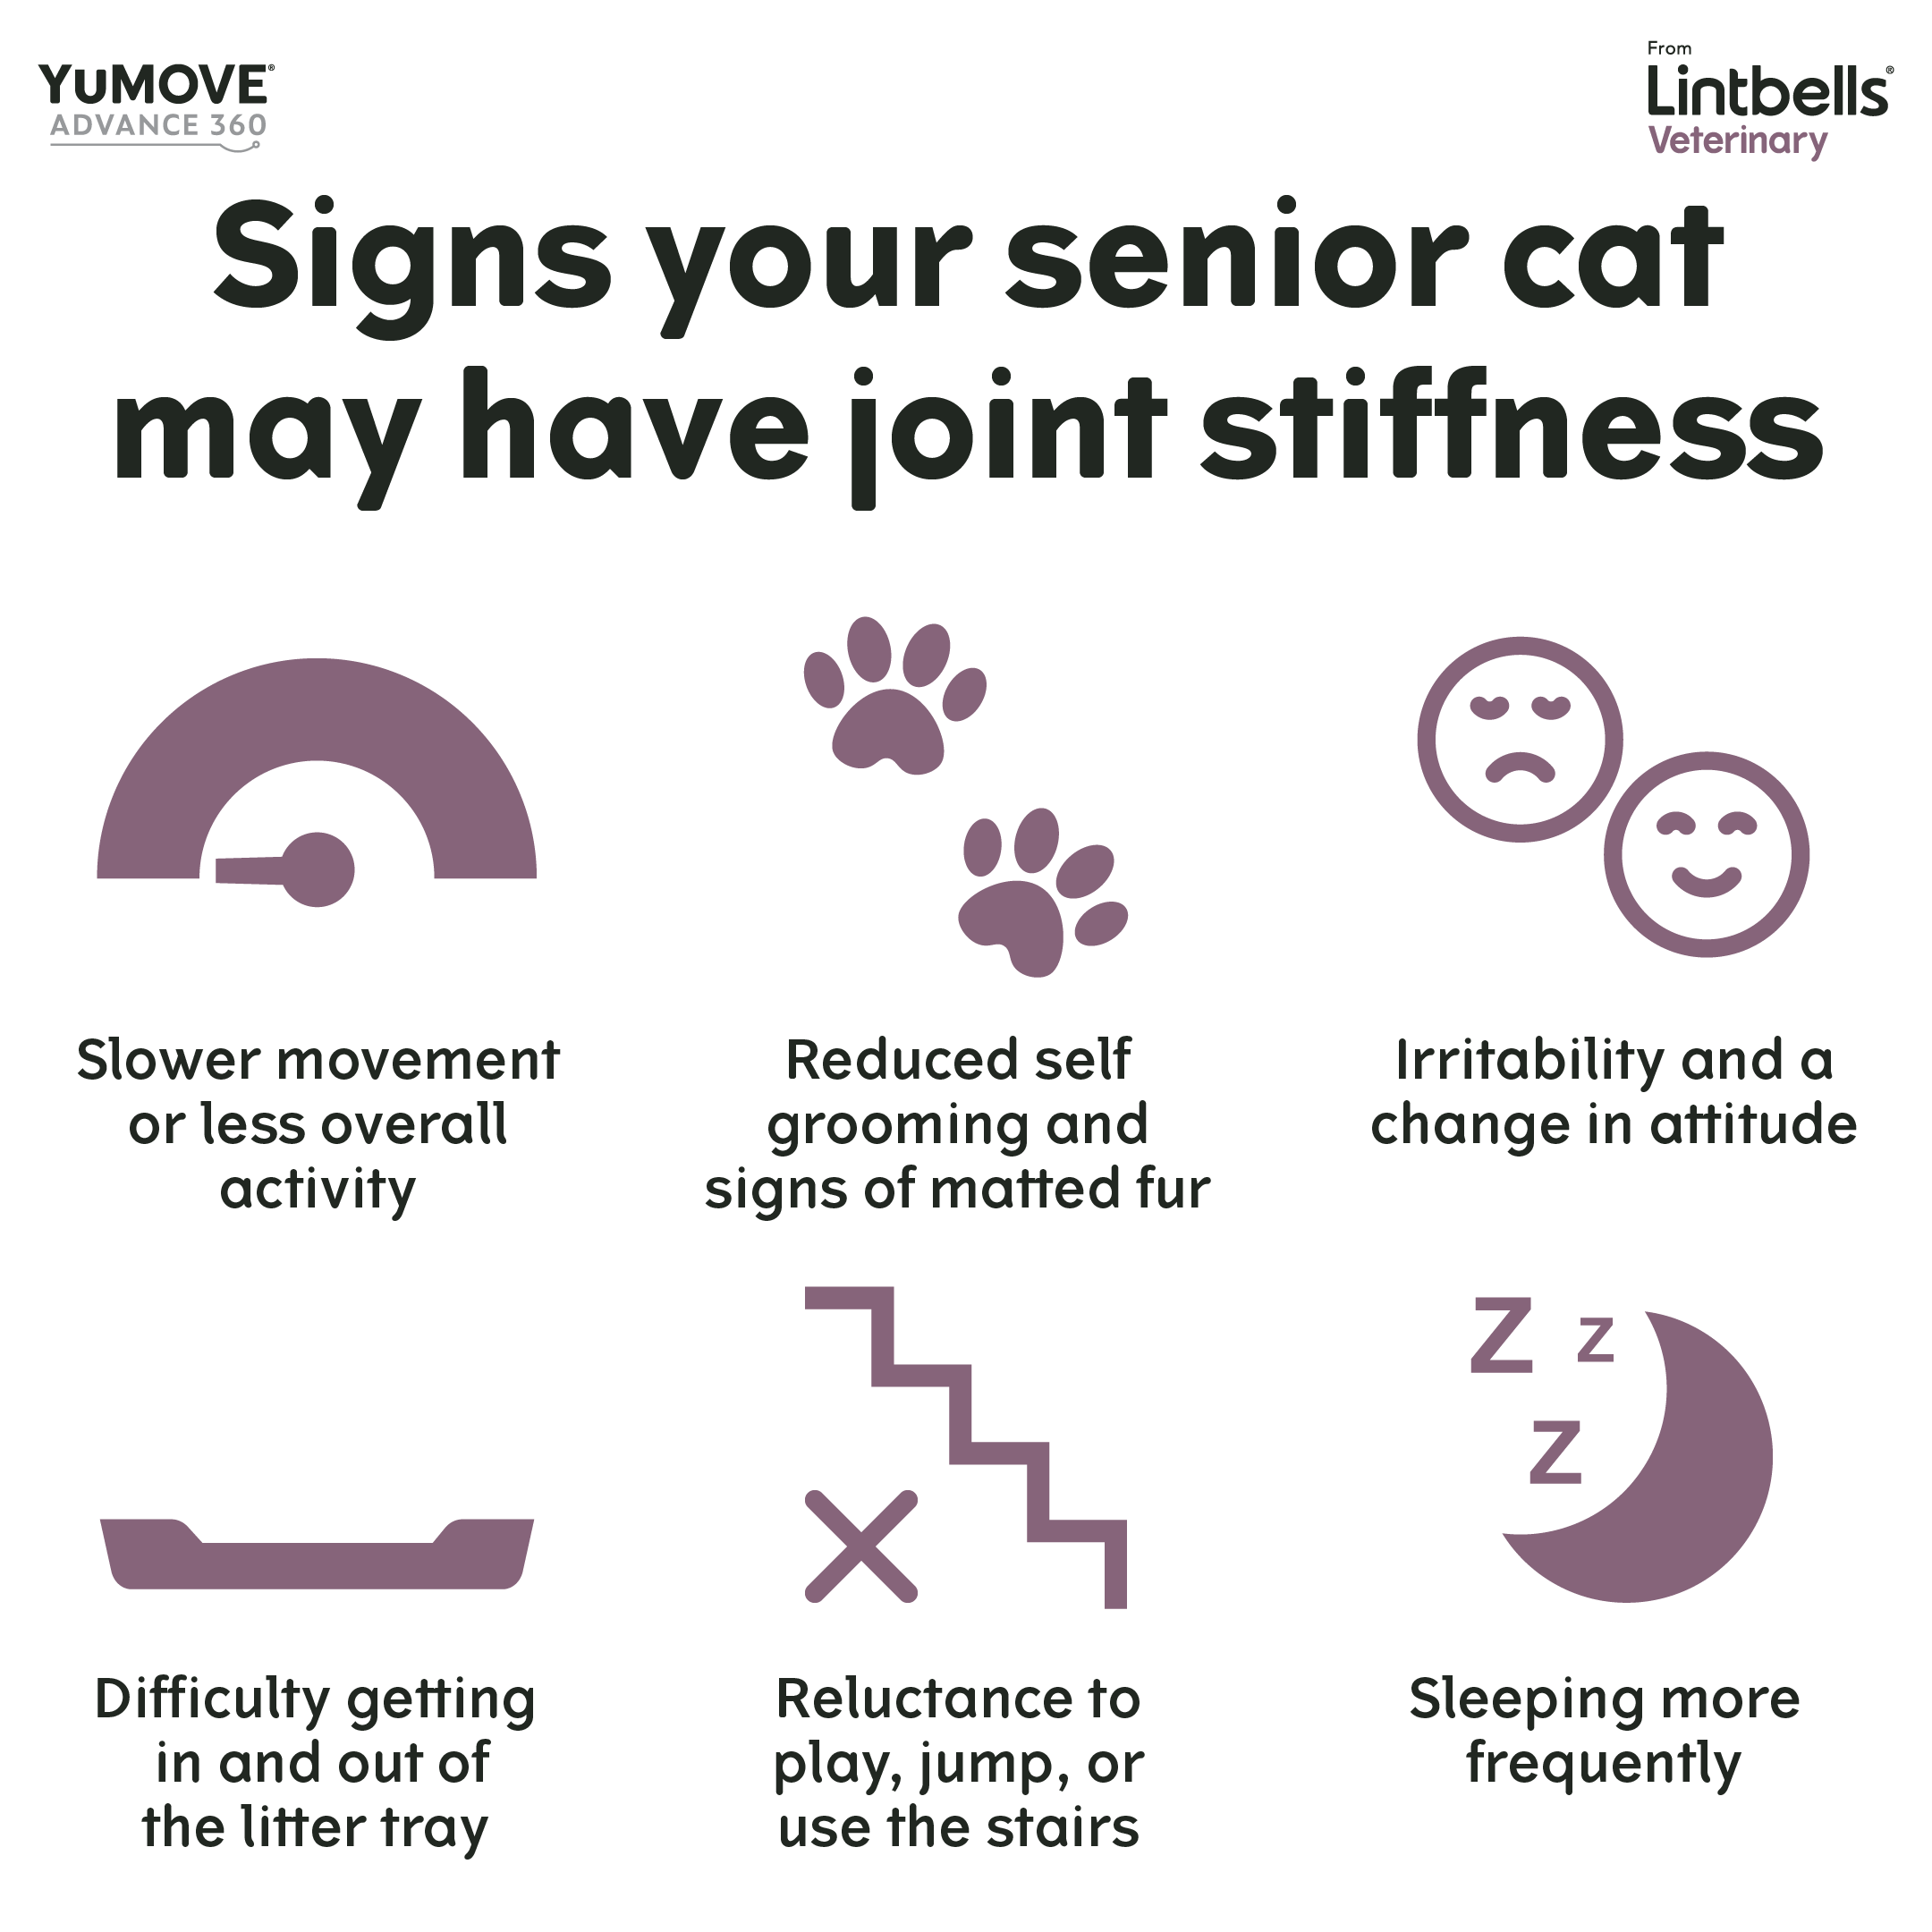 An infographic from Lintbells Veterinary lists indicators of joint stiffness in senior cats: Slower movement, reduced grooming, irritability, difficulty with the litter tray, reluctance to play or use stairs, and sleeping more frequently. Icons illustrate each sign.